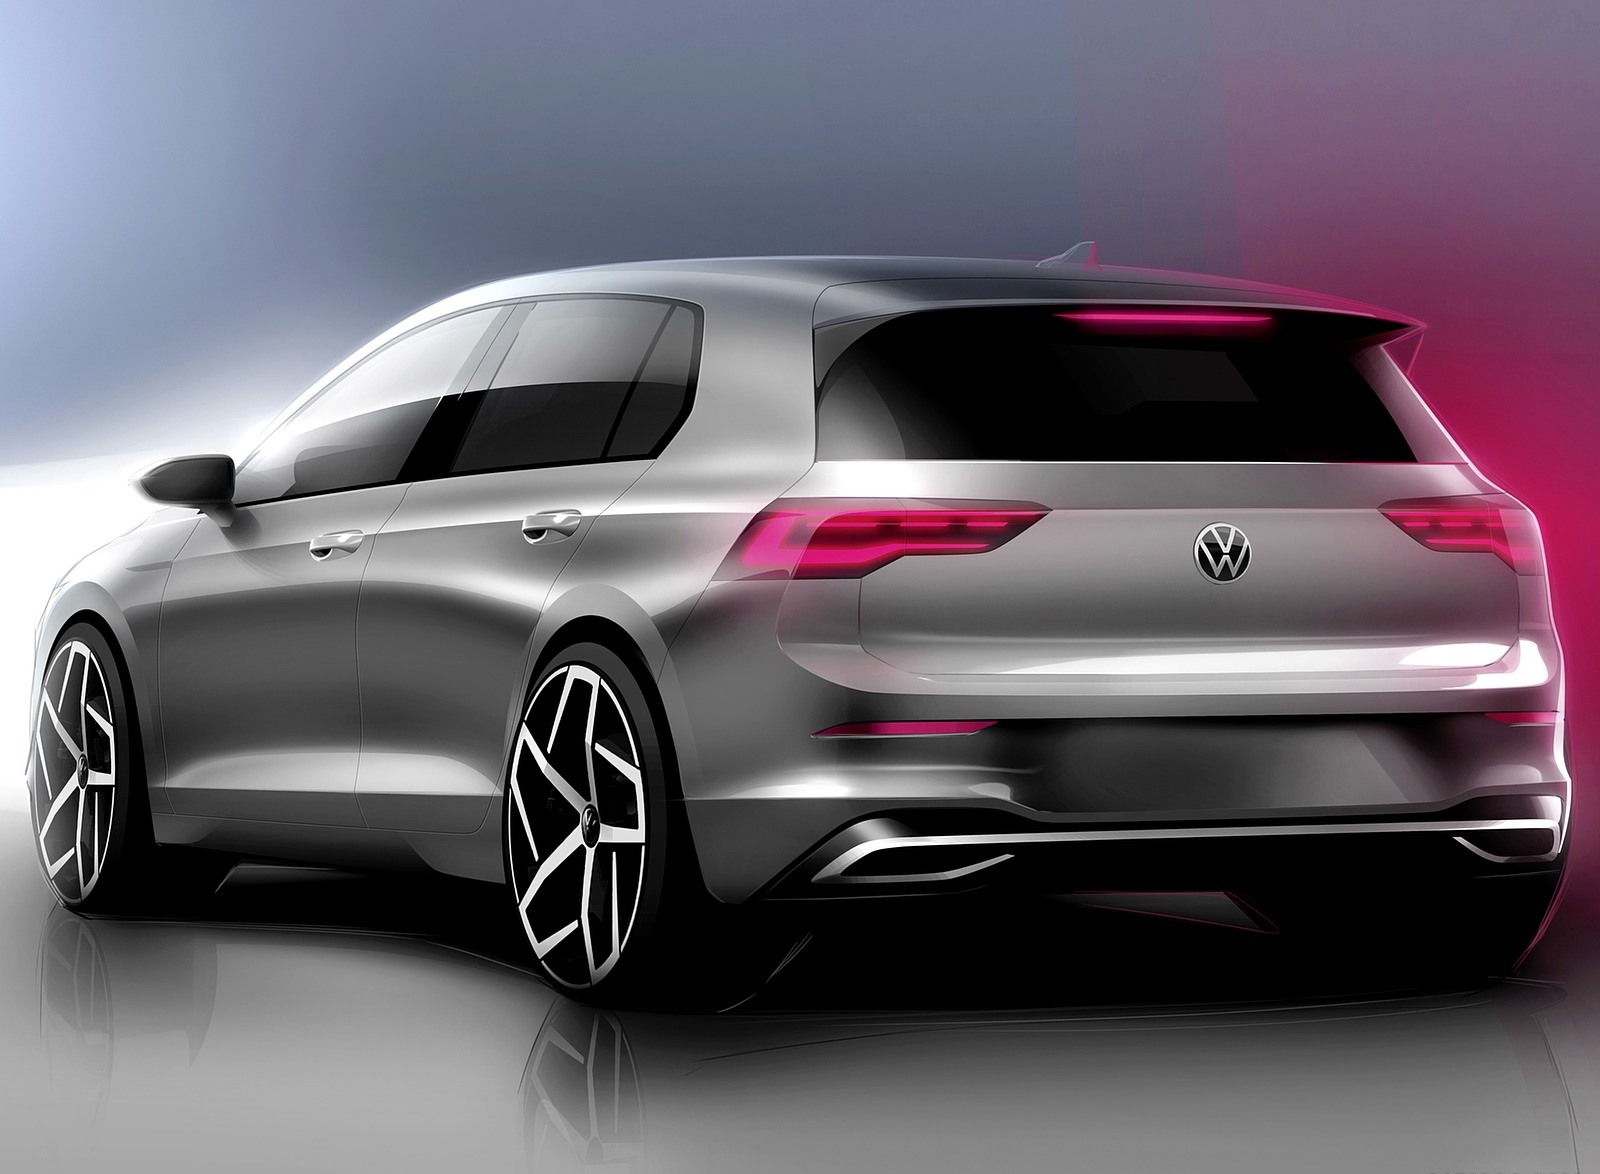 2020 Volkswagen Golf Mk8 and Previous Generations Design Sketch Wallpapers #74 of 81